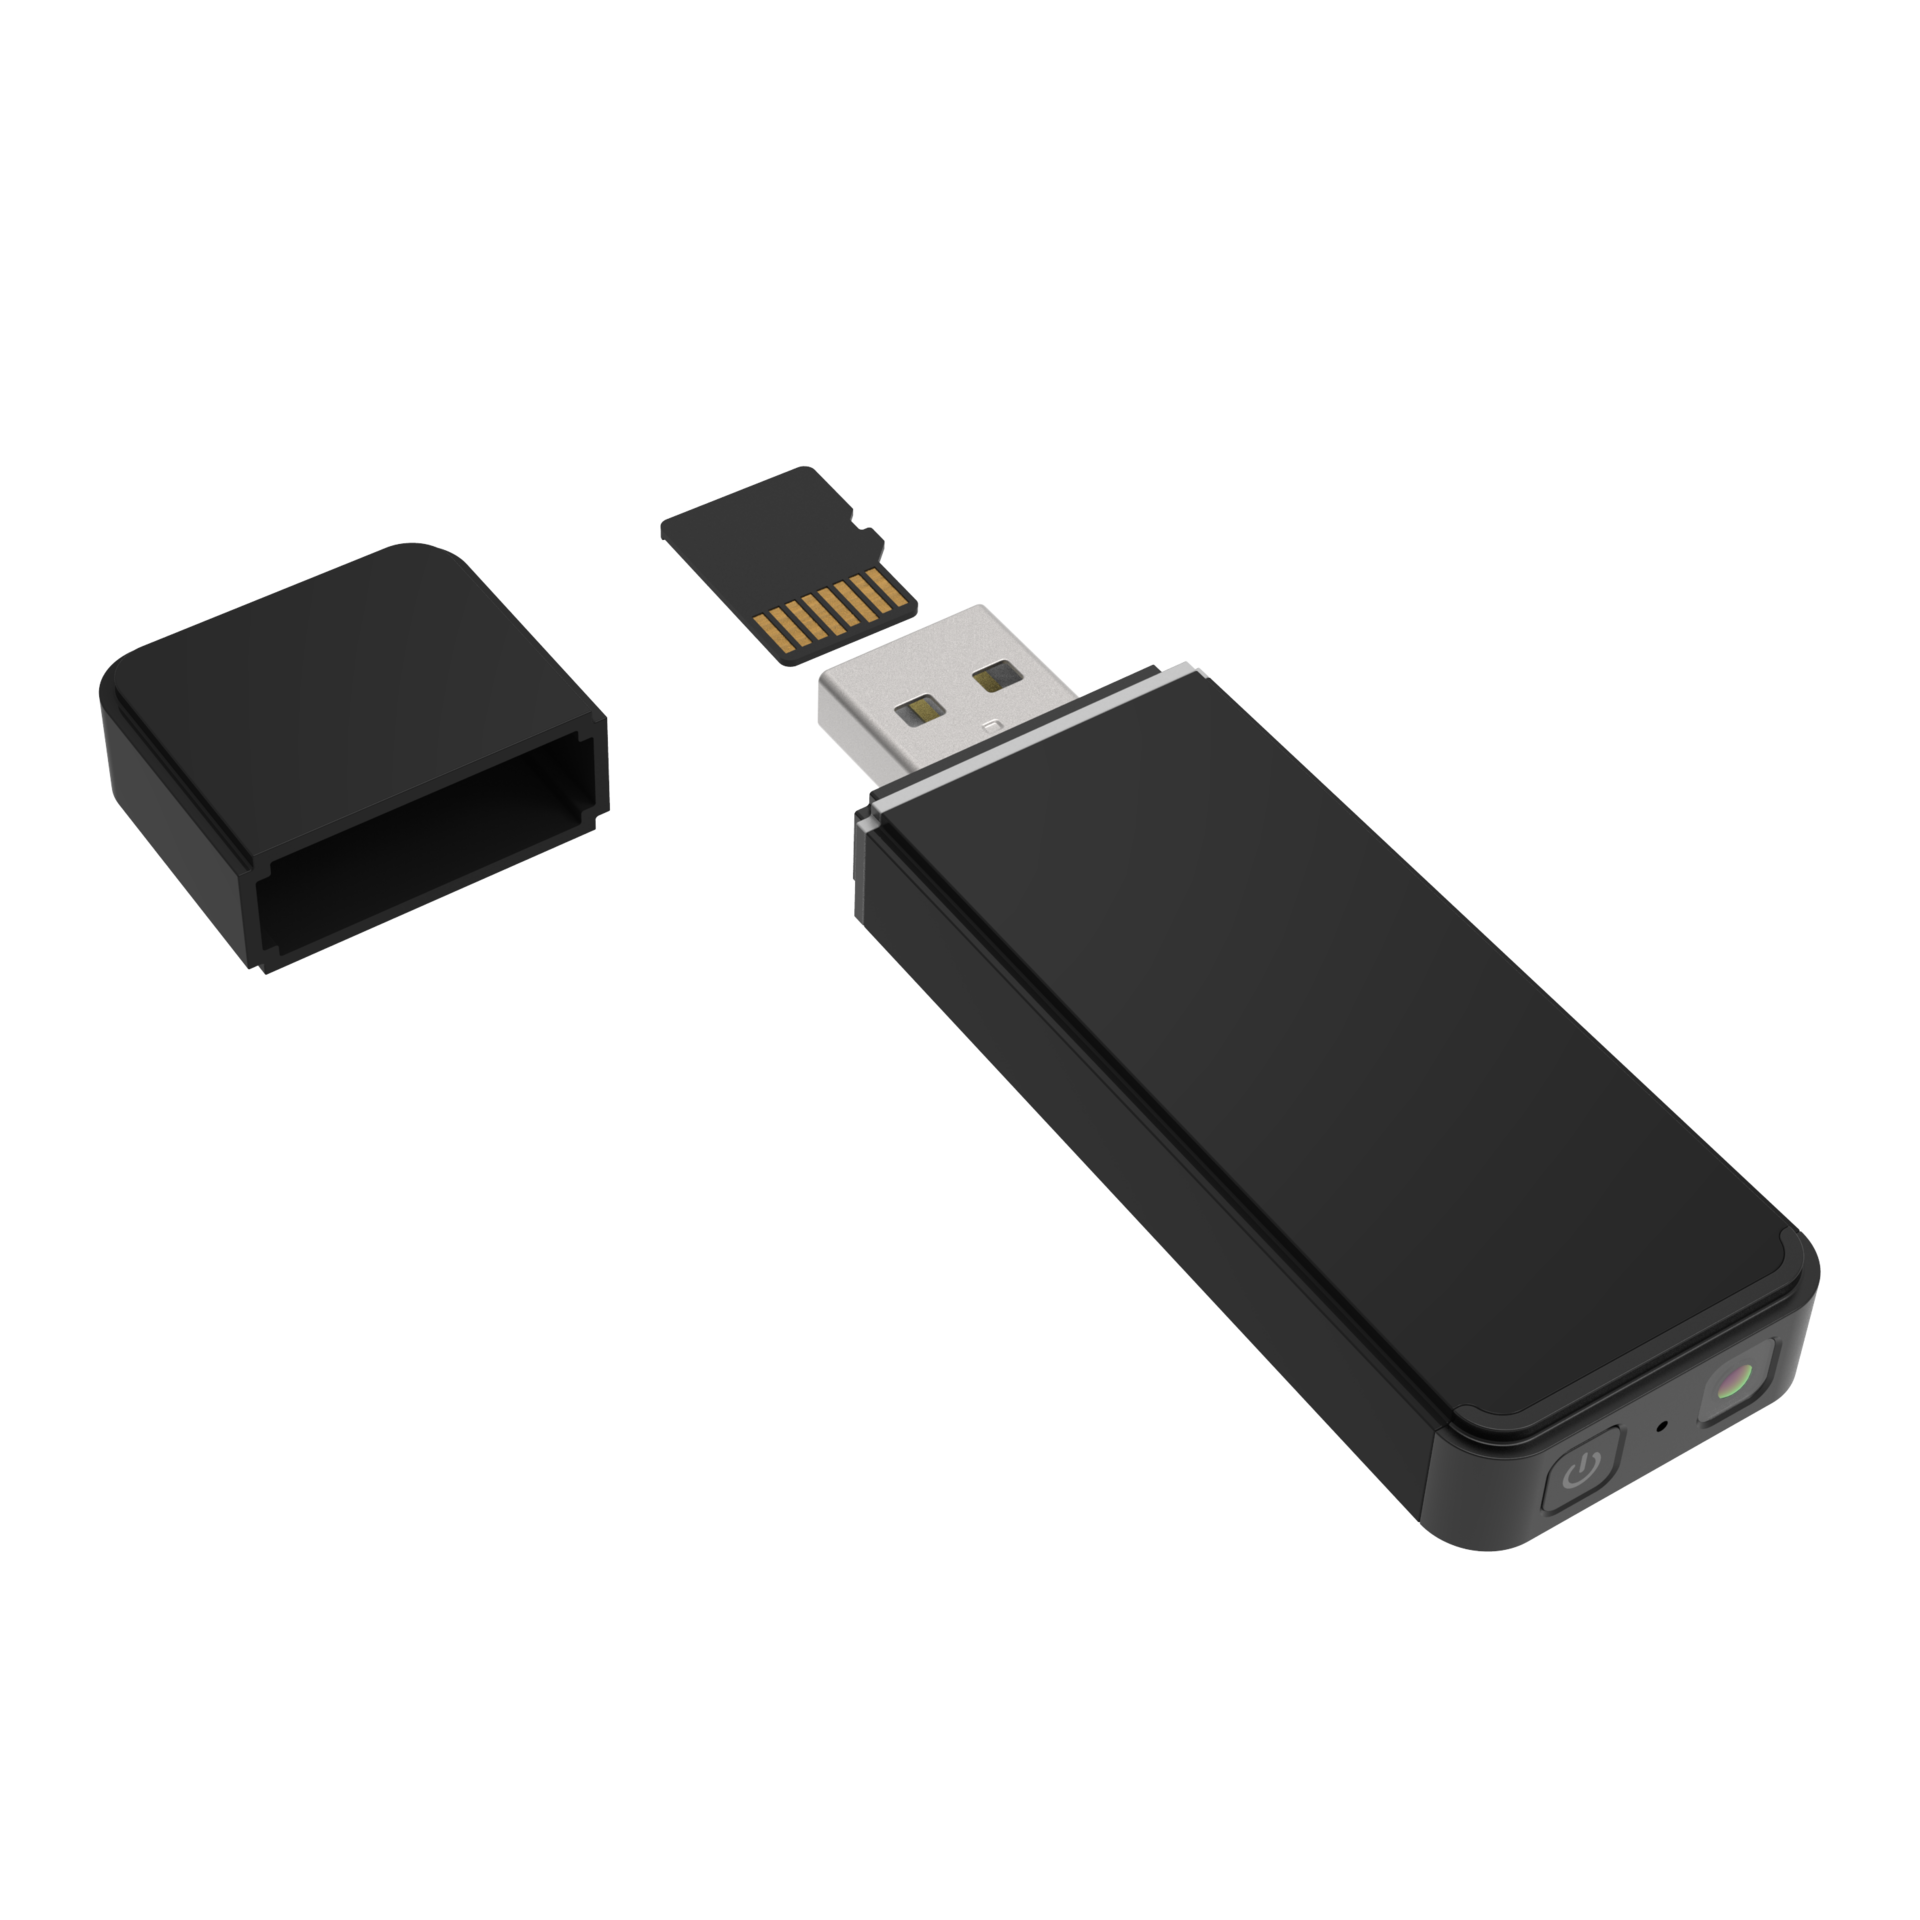 product-New In Stock USB Drive 1080P Digital Spy Camera With 128GB TF Card Hide For Lawyer Police-Hn-1